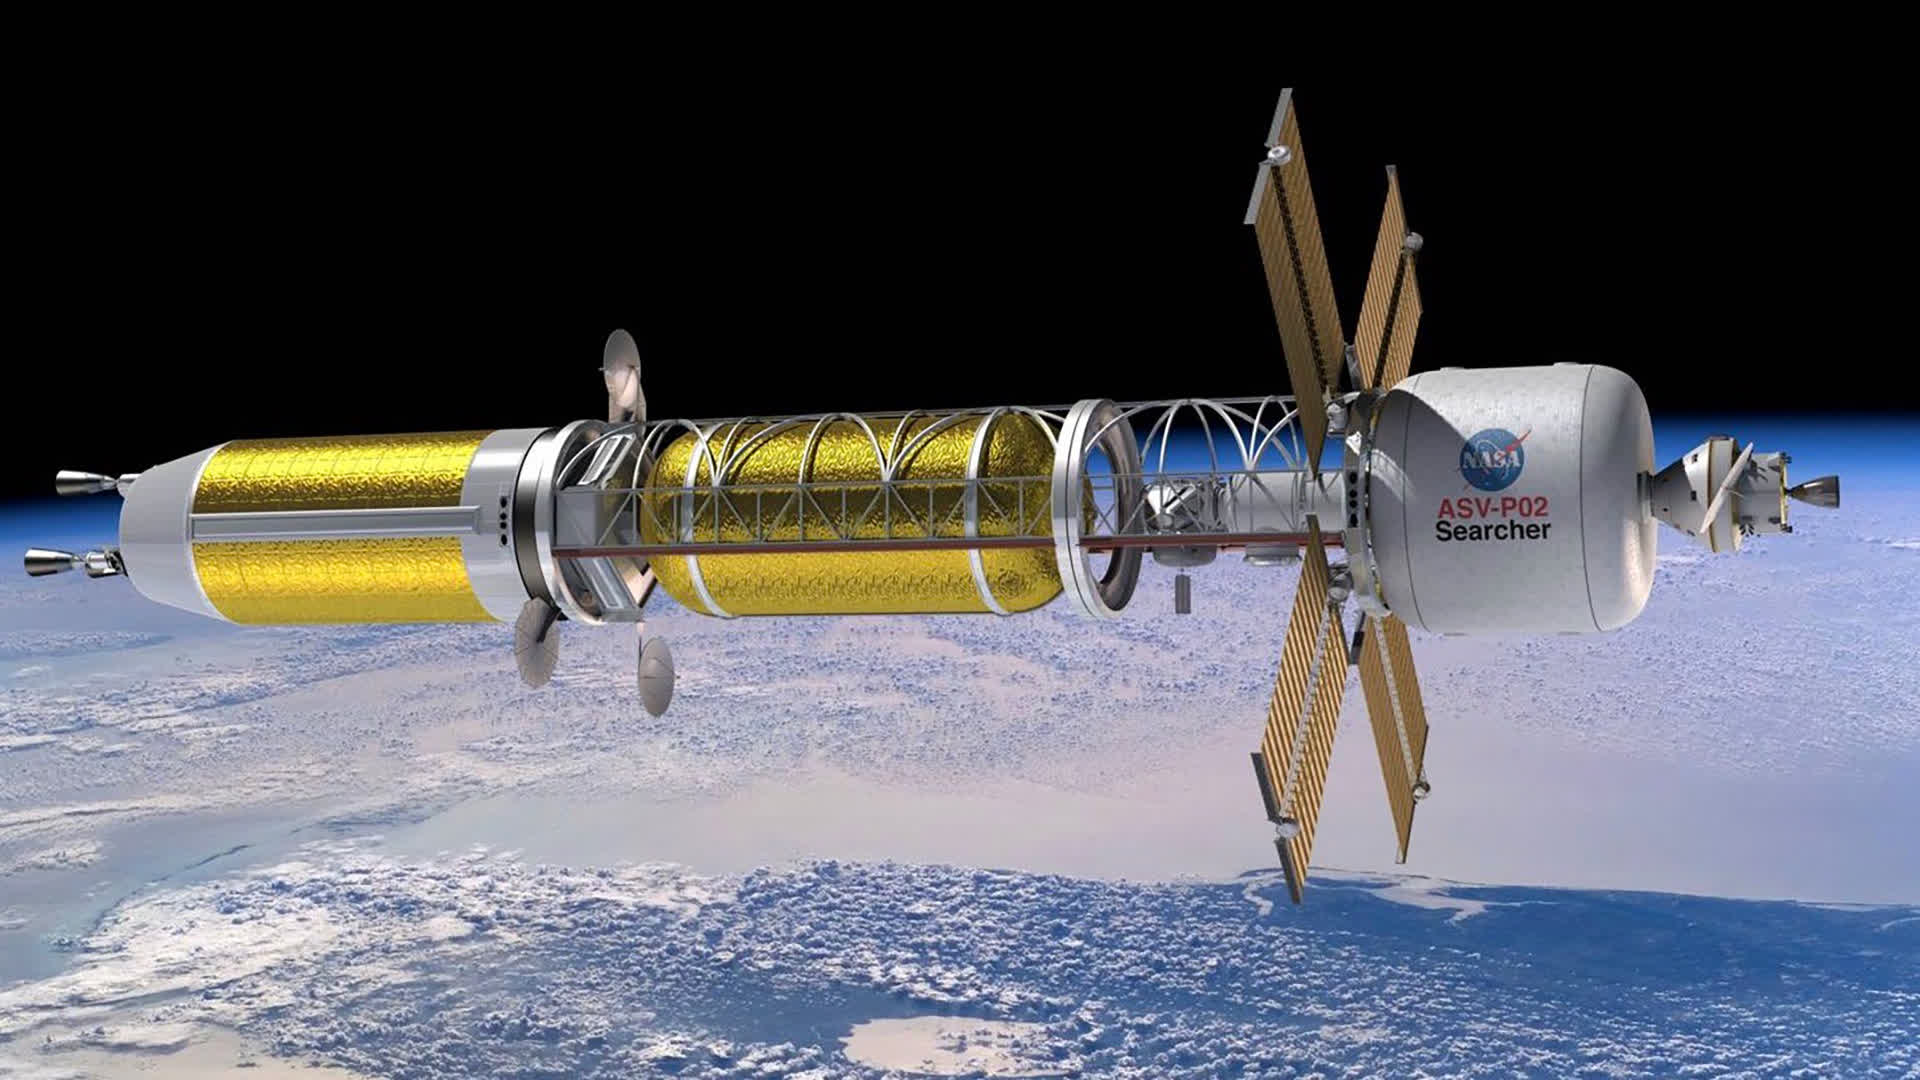 Department of Defense interested in nuclear propulsion system for small spacecraft